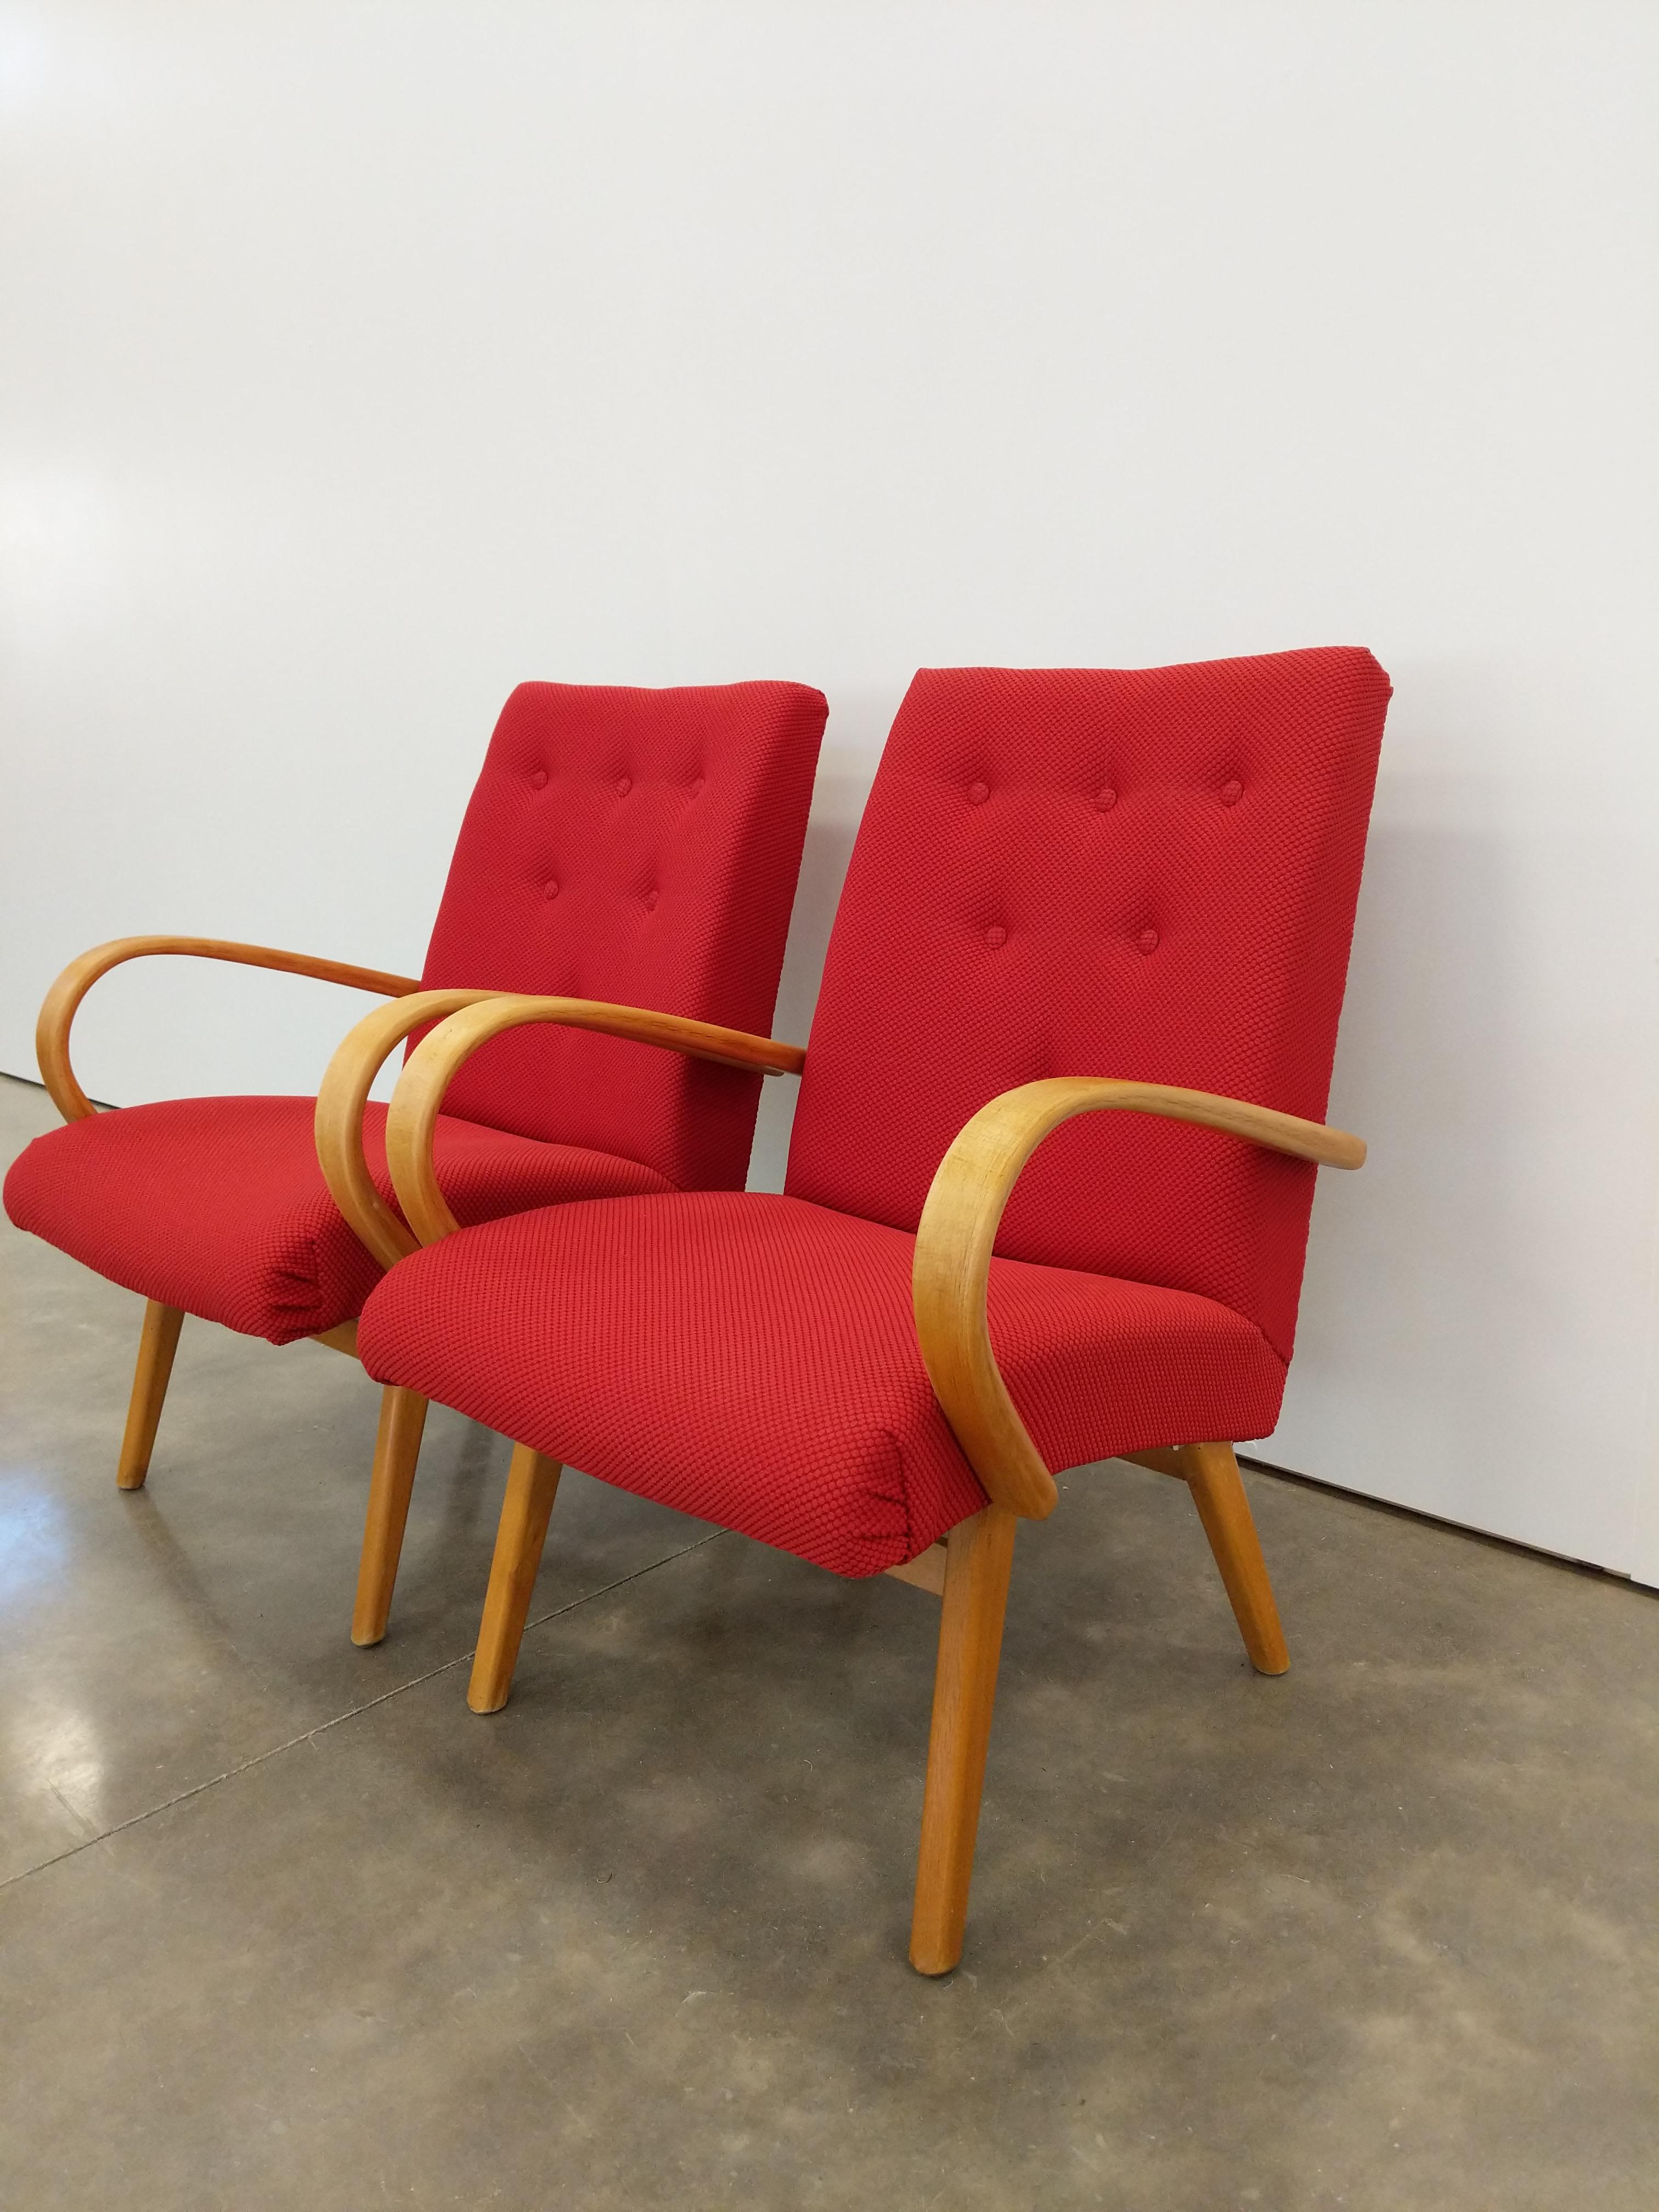 Upholstery Pair of Vintage Czech Mid Century Modern Lounge Chairs